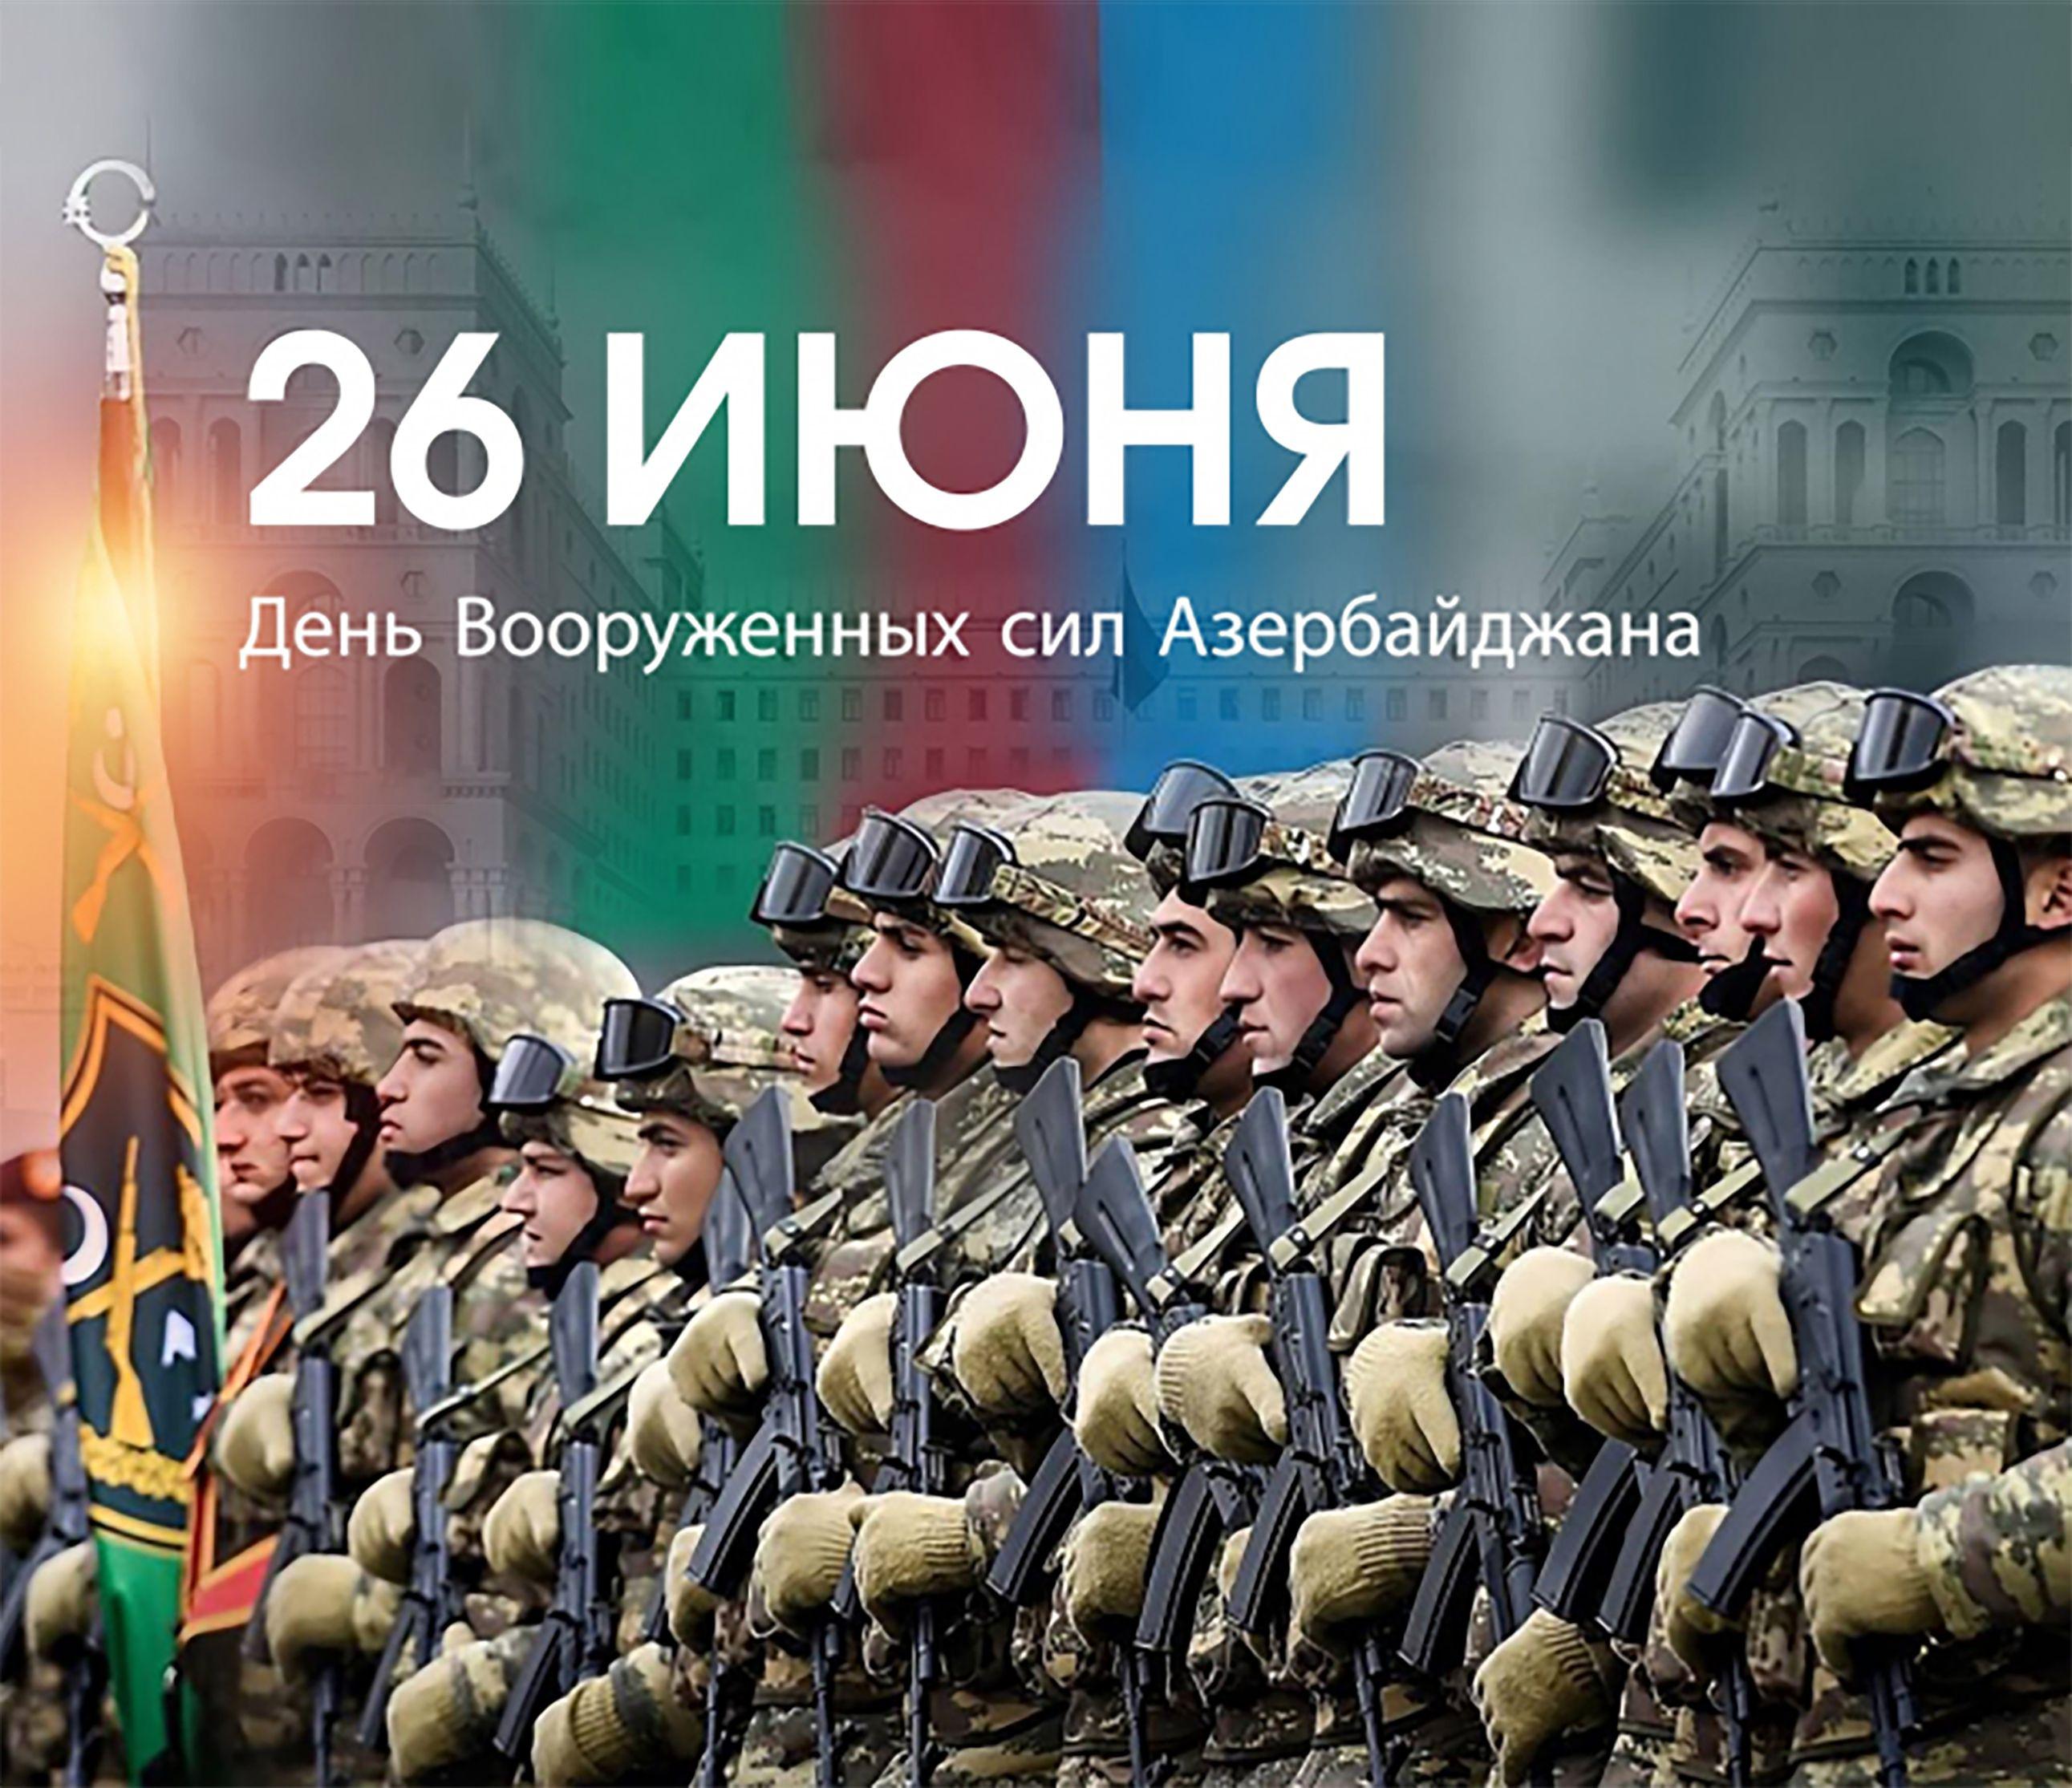 Azerbaijan marks the 106th anniversary of the establishment of its armed forces